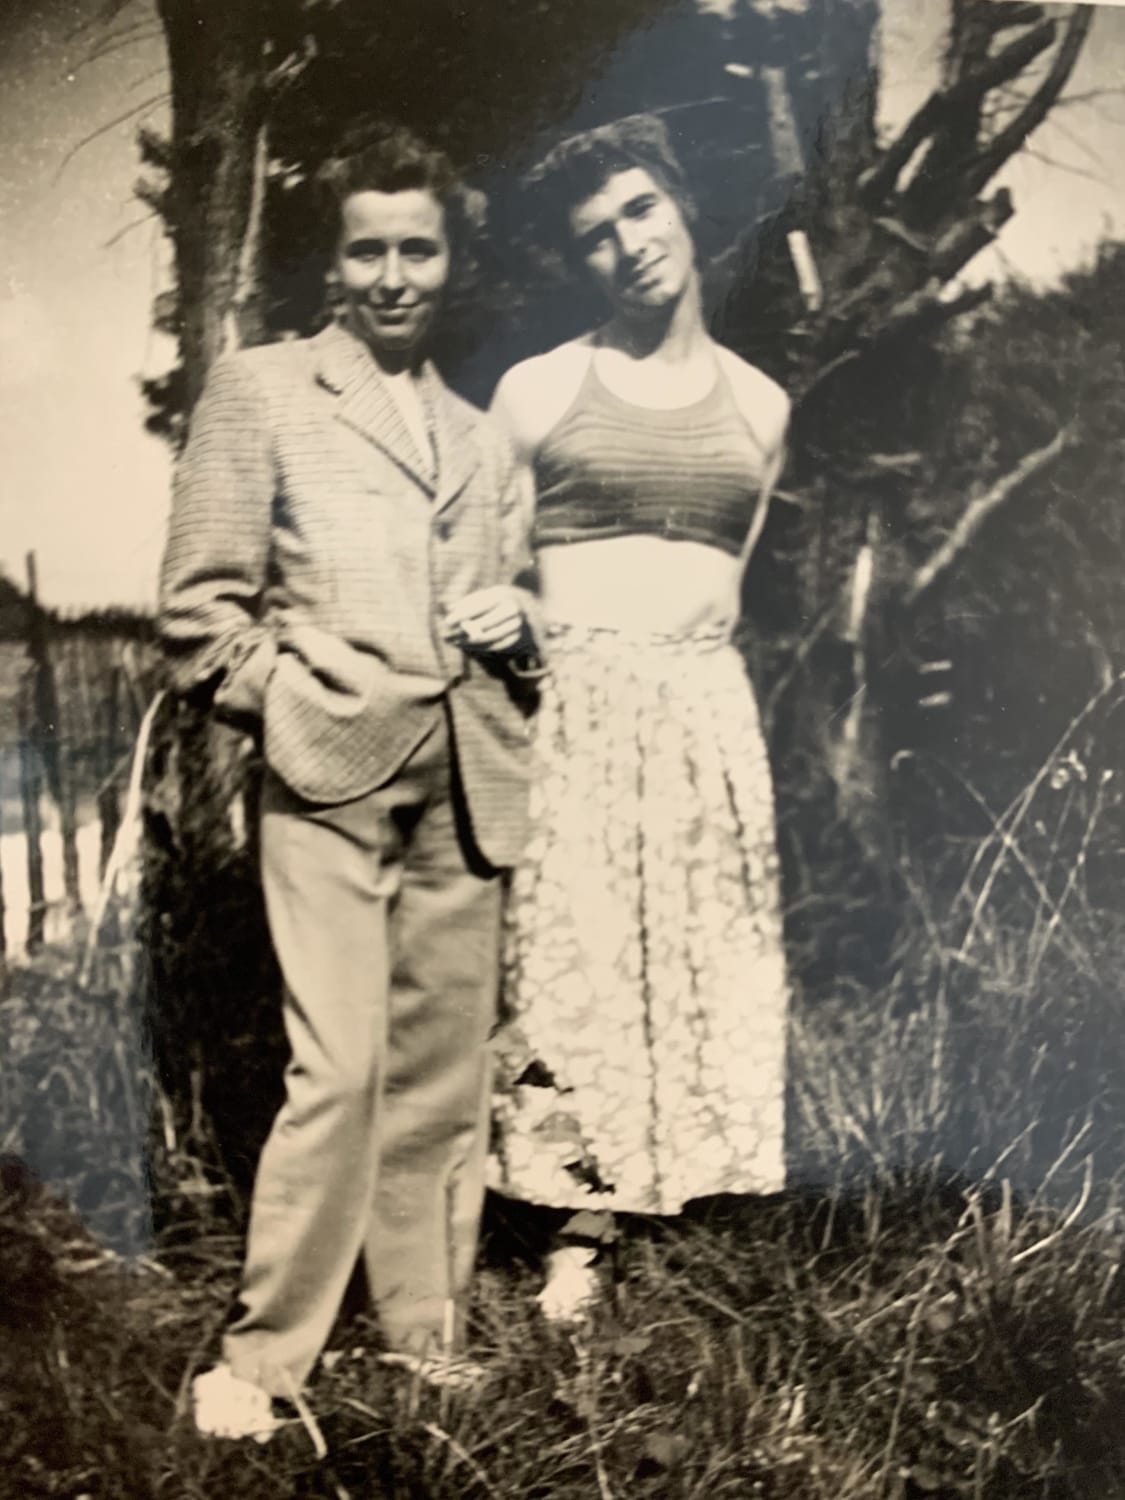 My great grandparents - drunk on a camping holiday decided to swap clothes - early 1940s